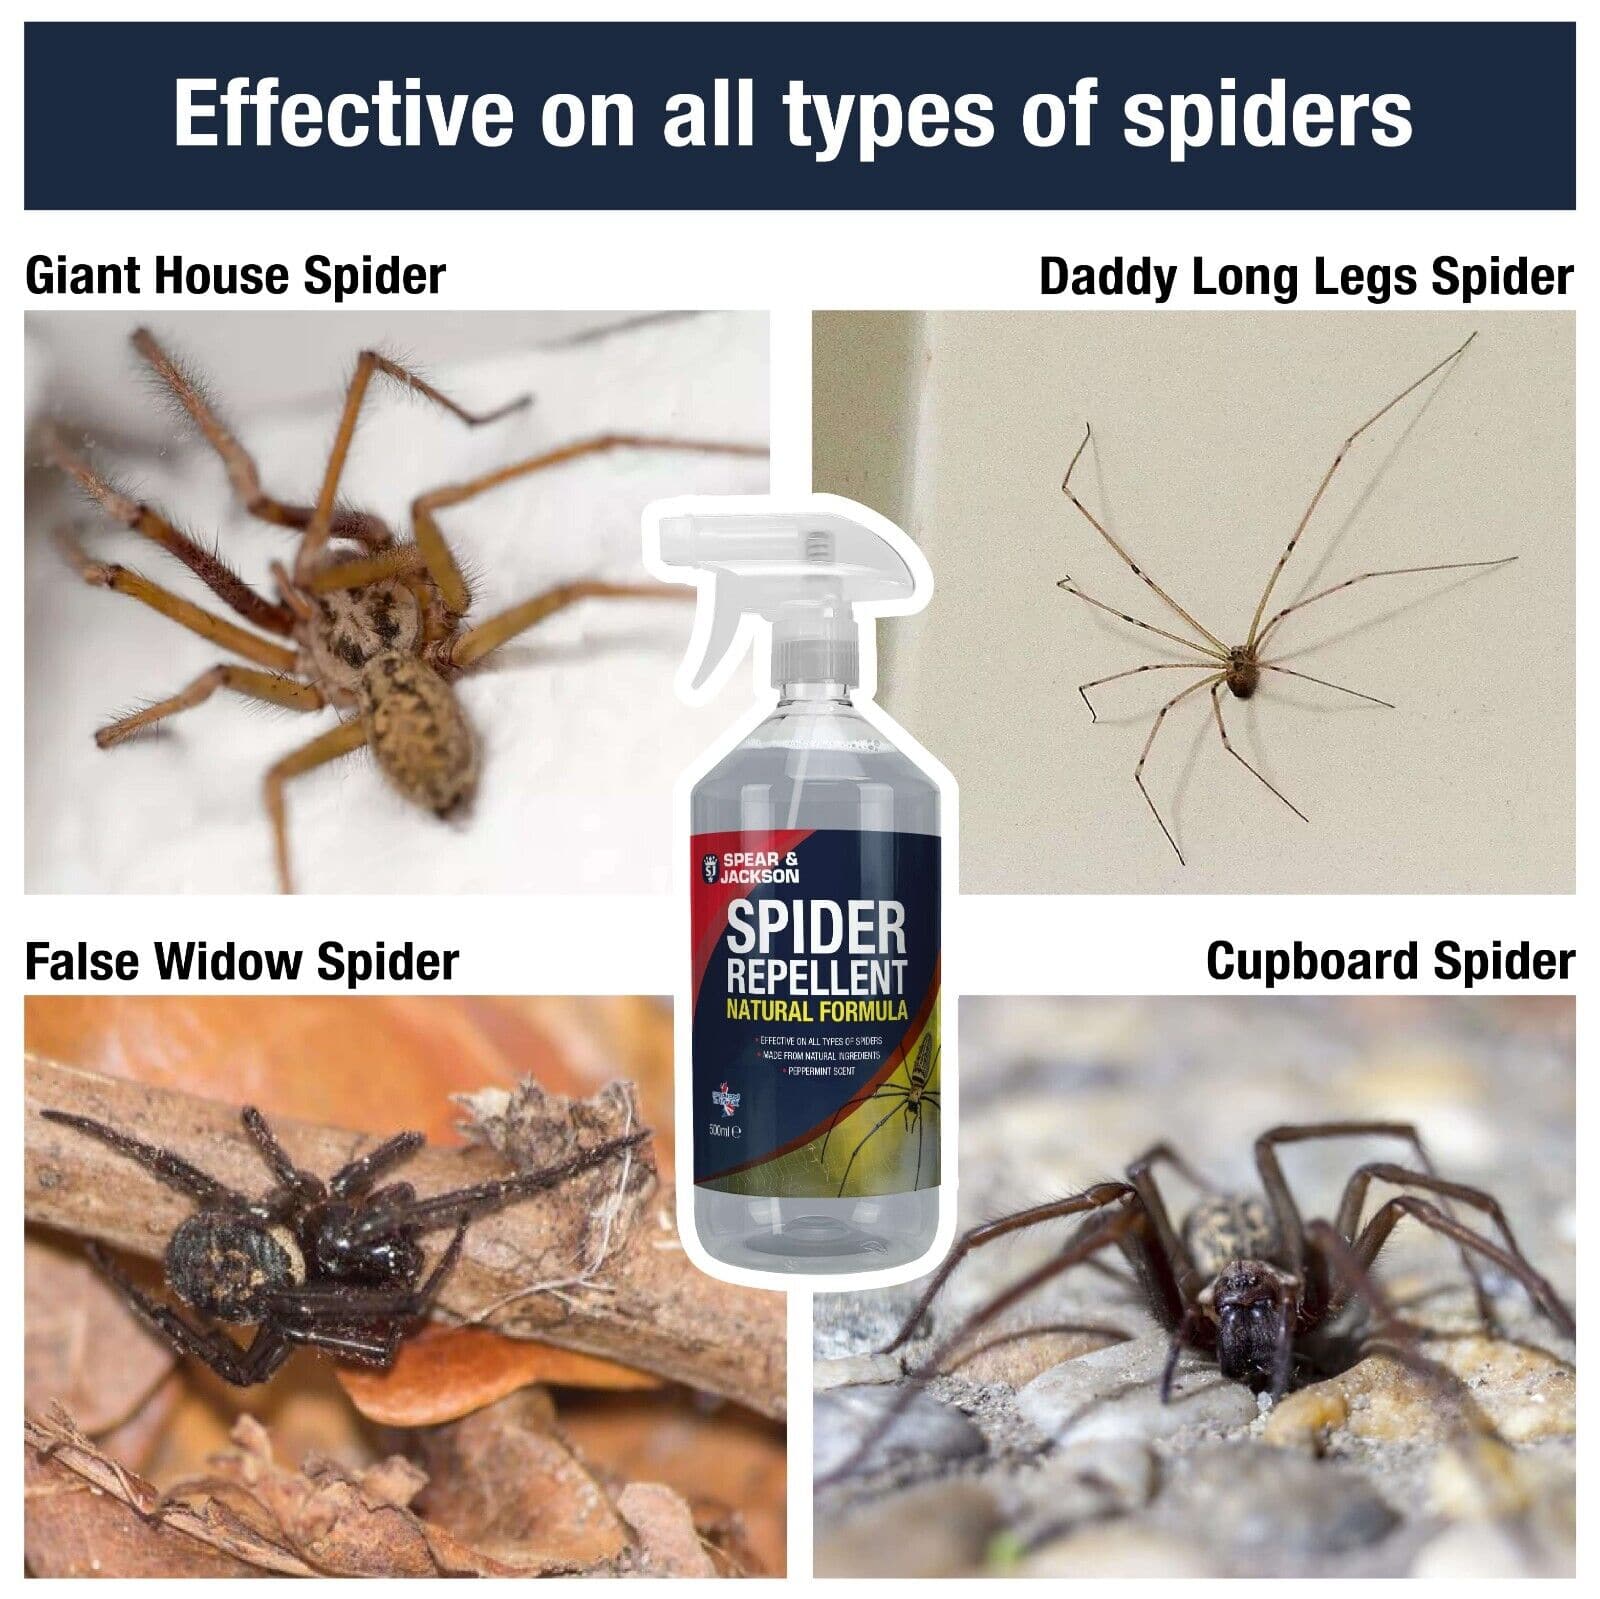 Spider Repellent 500ml Peppermint Scent Spear and Jackson